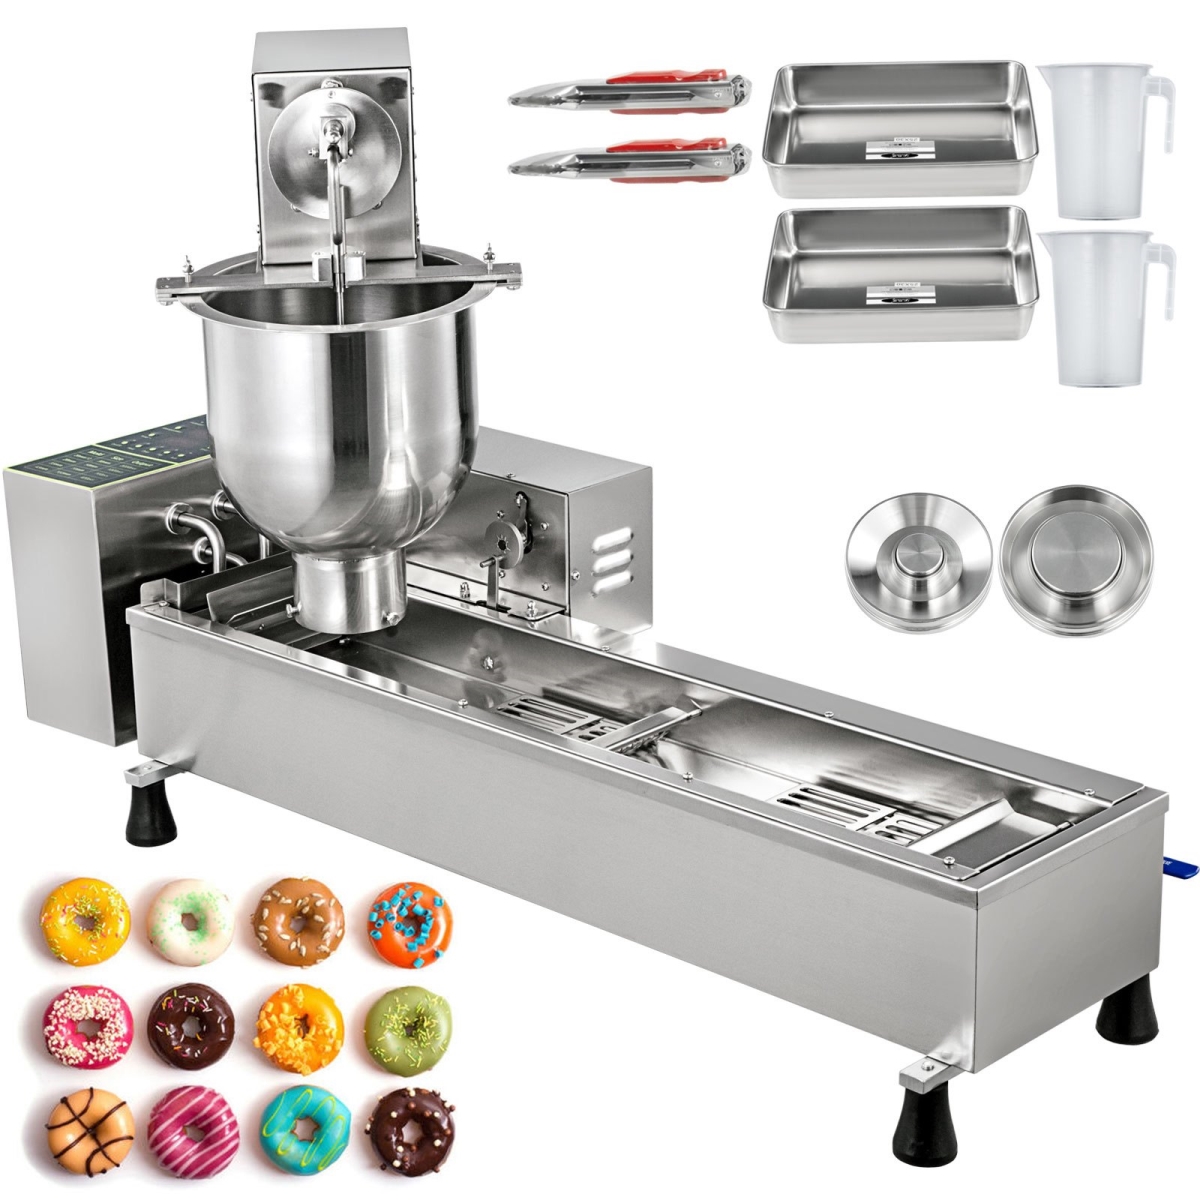 Picture of Vevor QZDTTQJDP00000001V1 110V Commercial Automatic Donut Making Machine with 3 Sizes Molds